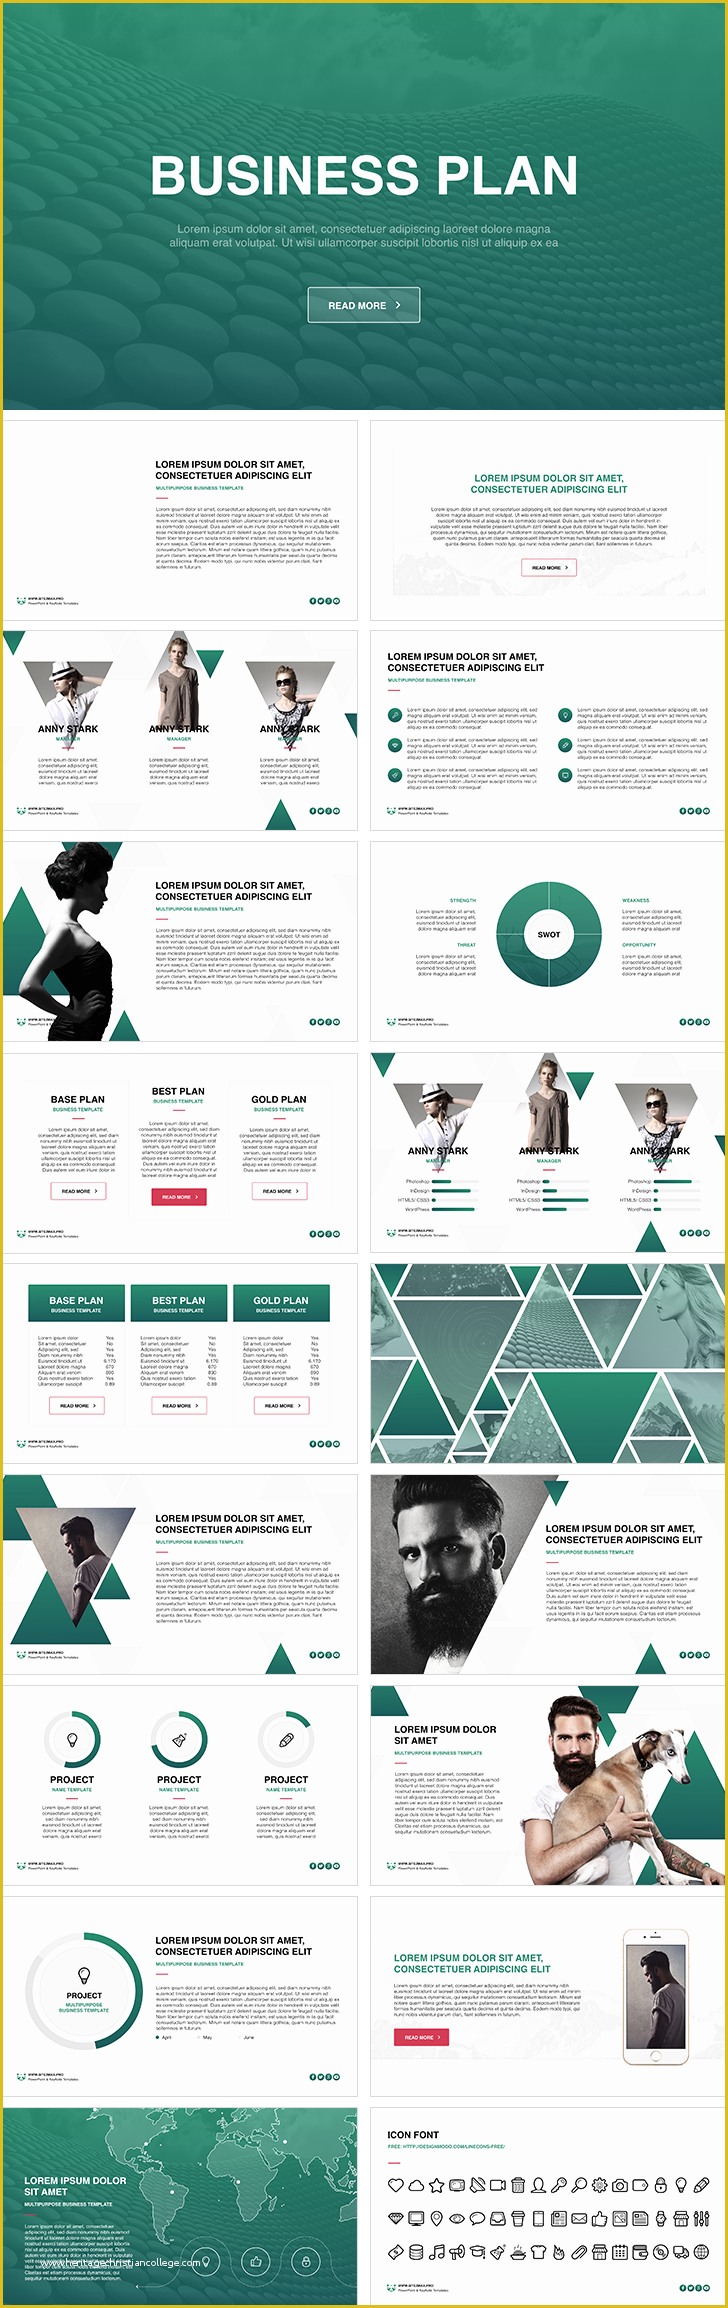 Business Plan Powerpoint Template Free Of Business Plan Free Powerpoint Template Download Free